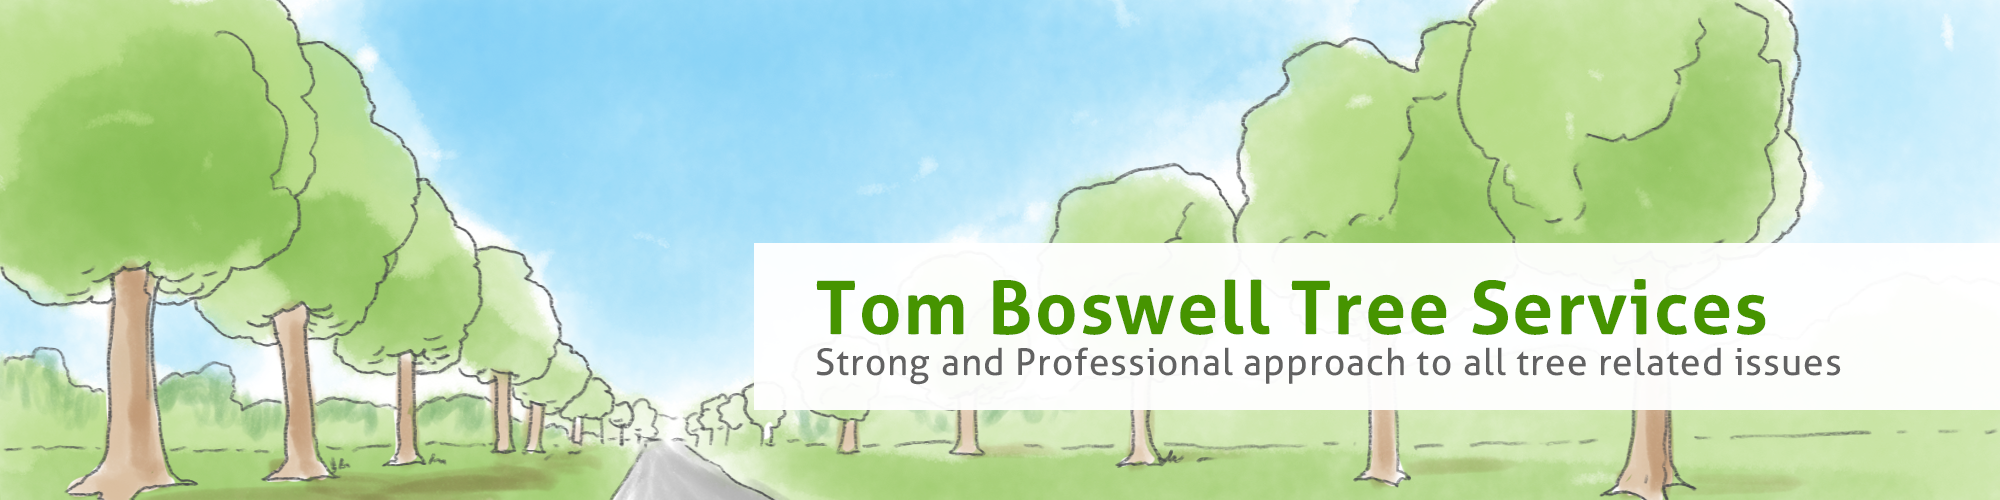 Tom Boswell Tree Services